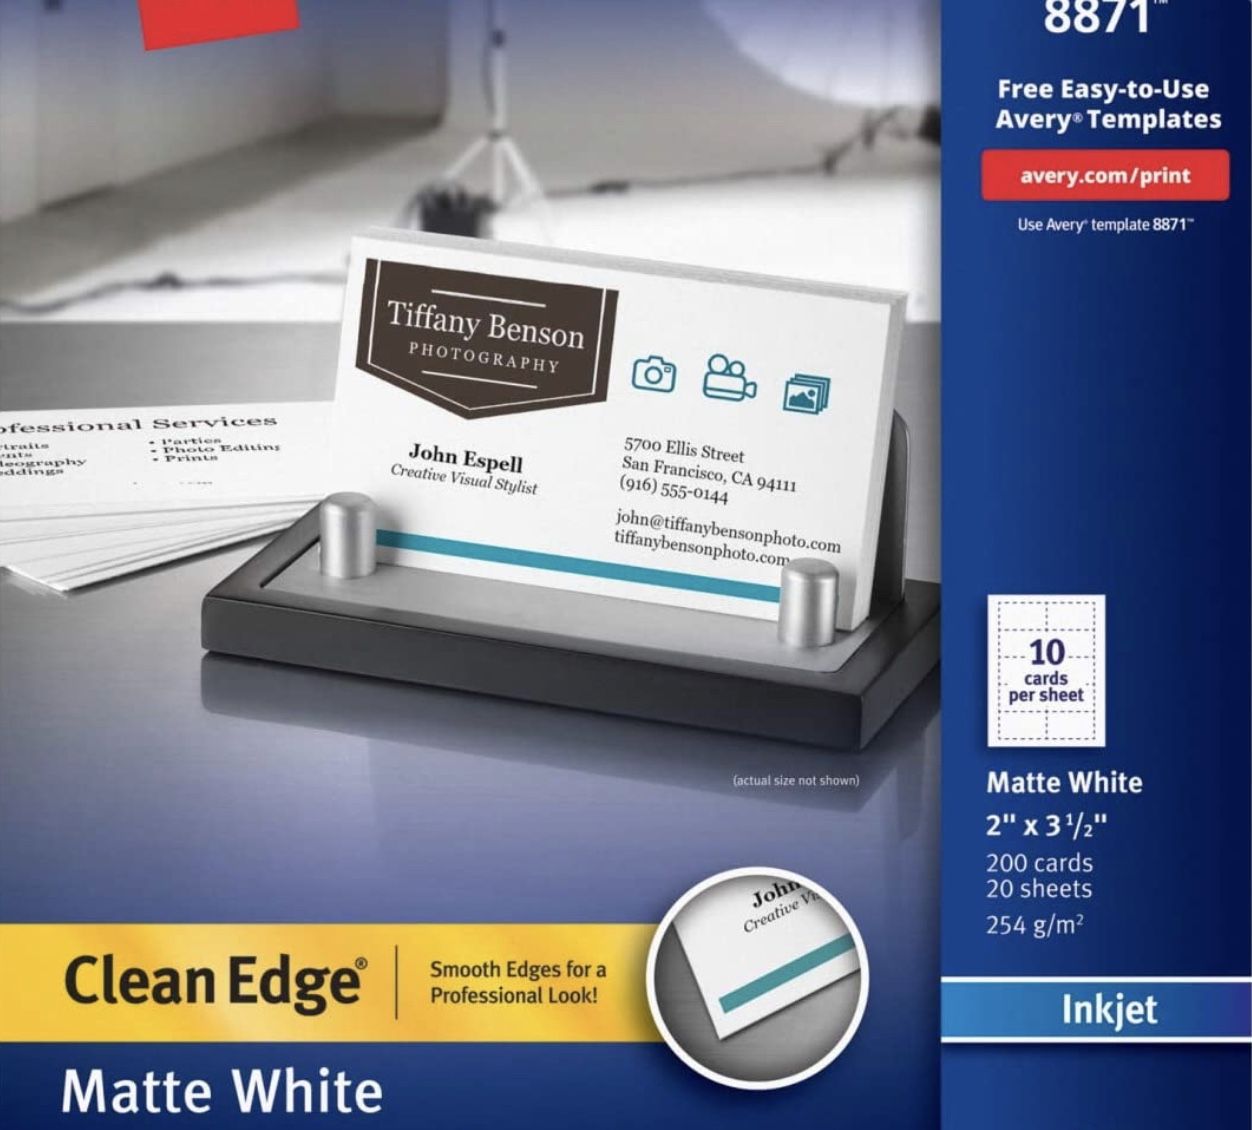 Printable Business Cards, Inkjet Printers, 200 Cards, 2 x 3.5, Clean Edge, Heavyweight (8871)